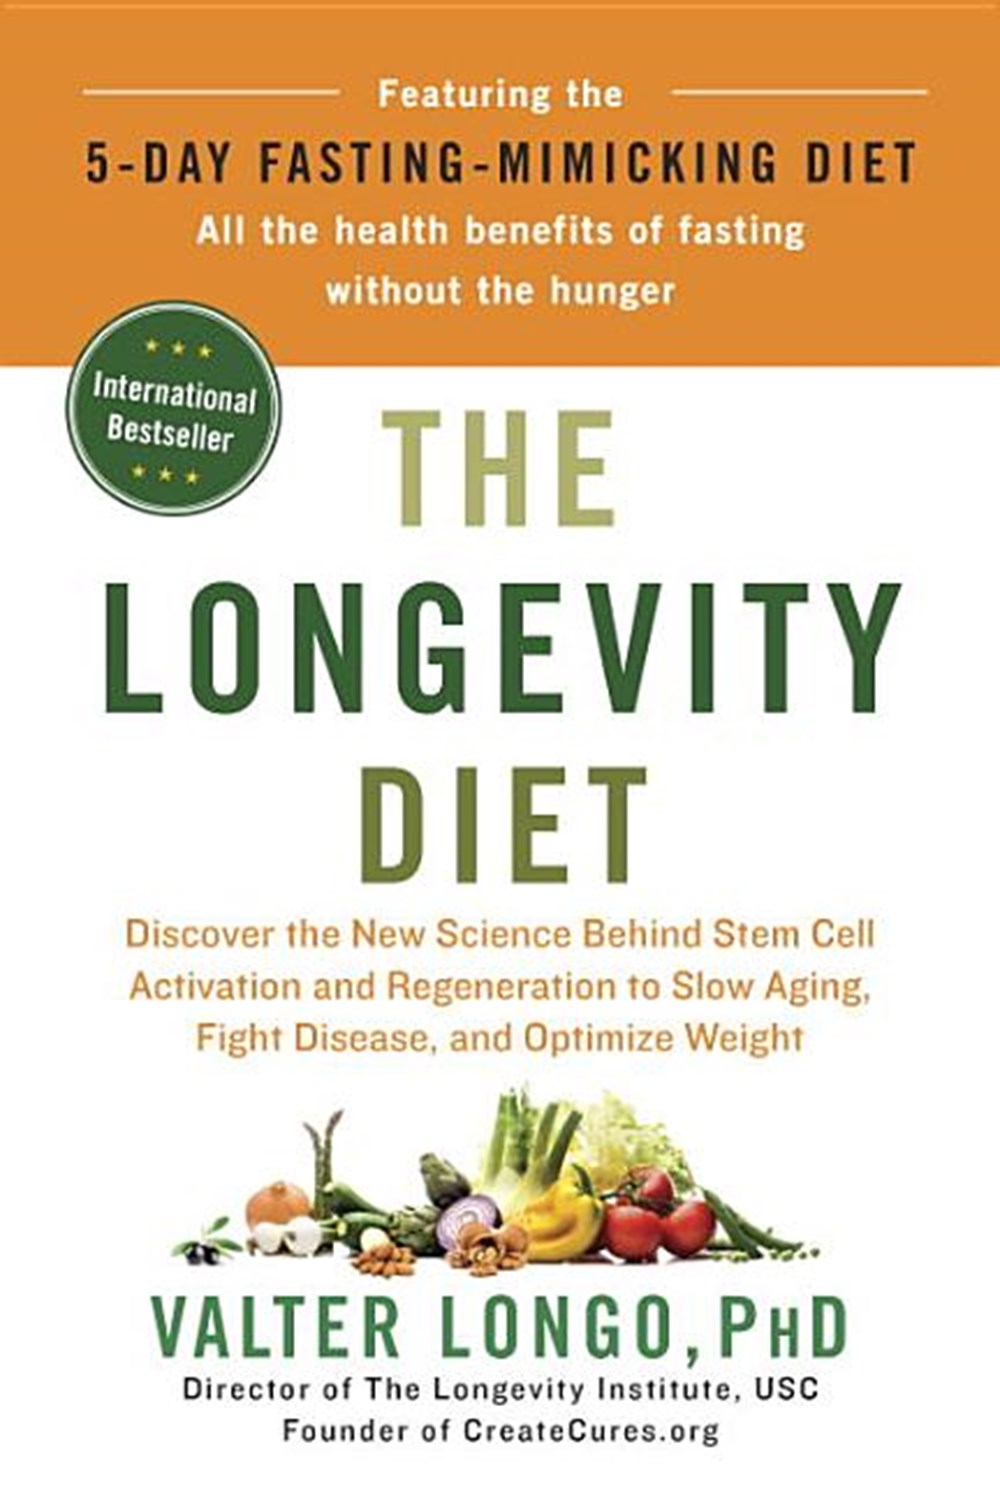 Longevity Diet: Discover the New Science Behind Stem Cell Activation and Regeneration to Slow Aging,